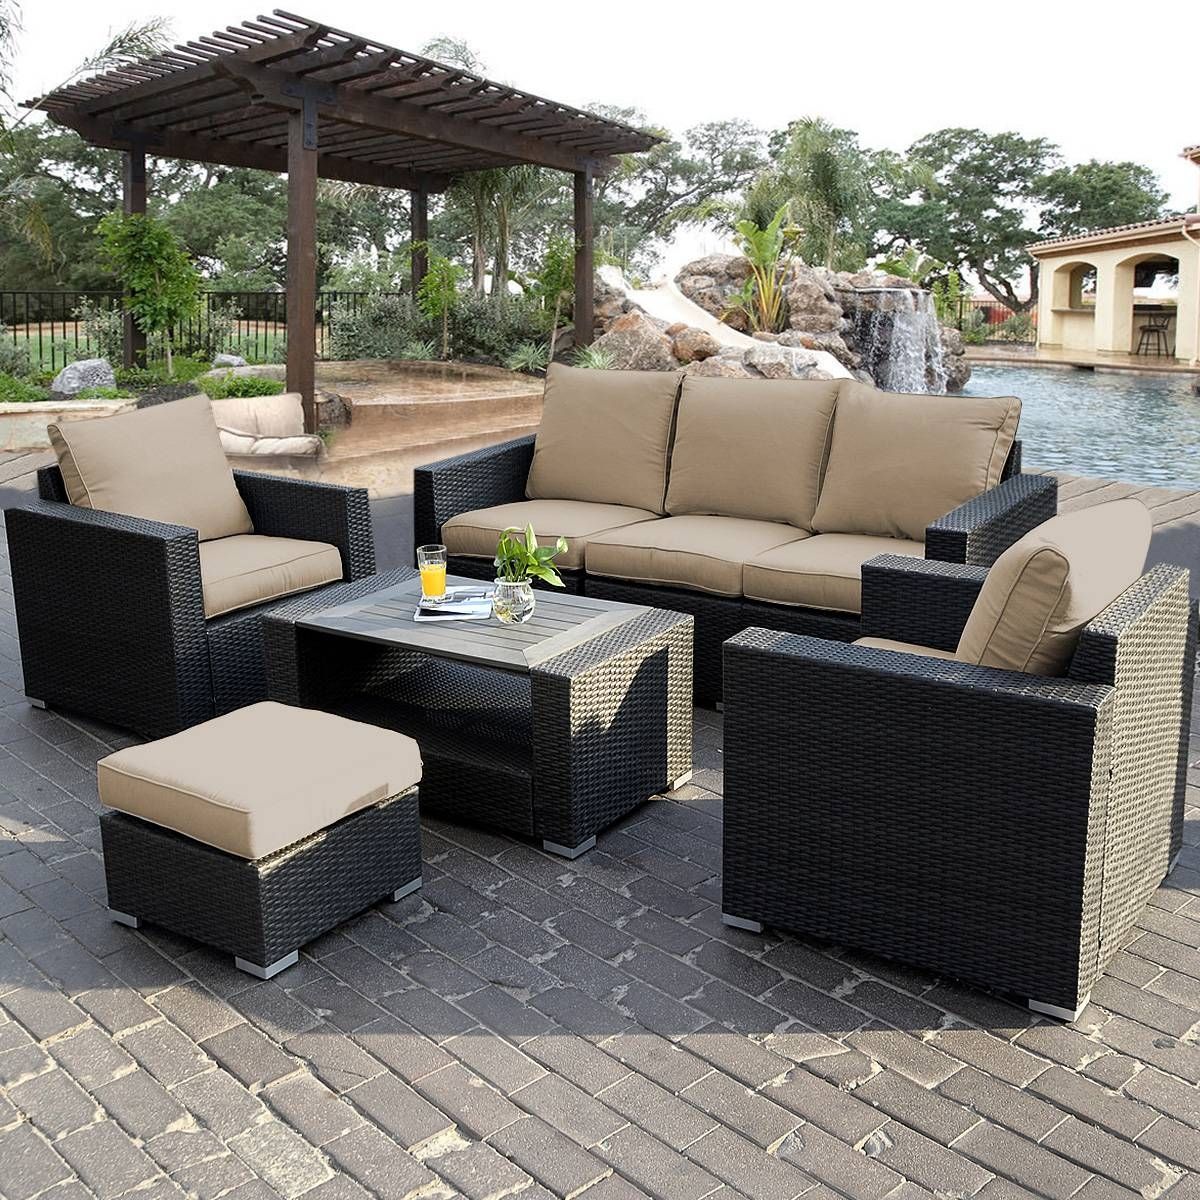 Furniture: Outdoor Furniture Design With Kmart Patio Furniture For Cheap Patio Sofas (View 12 of 30)